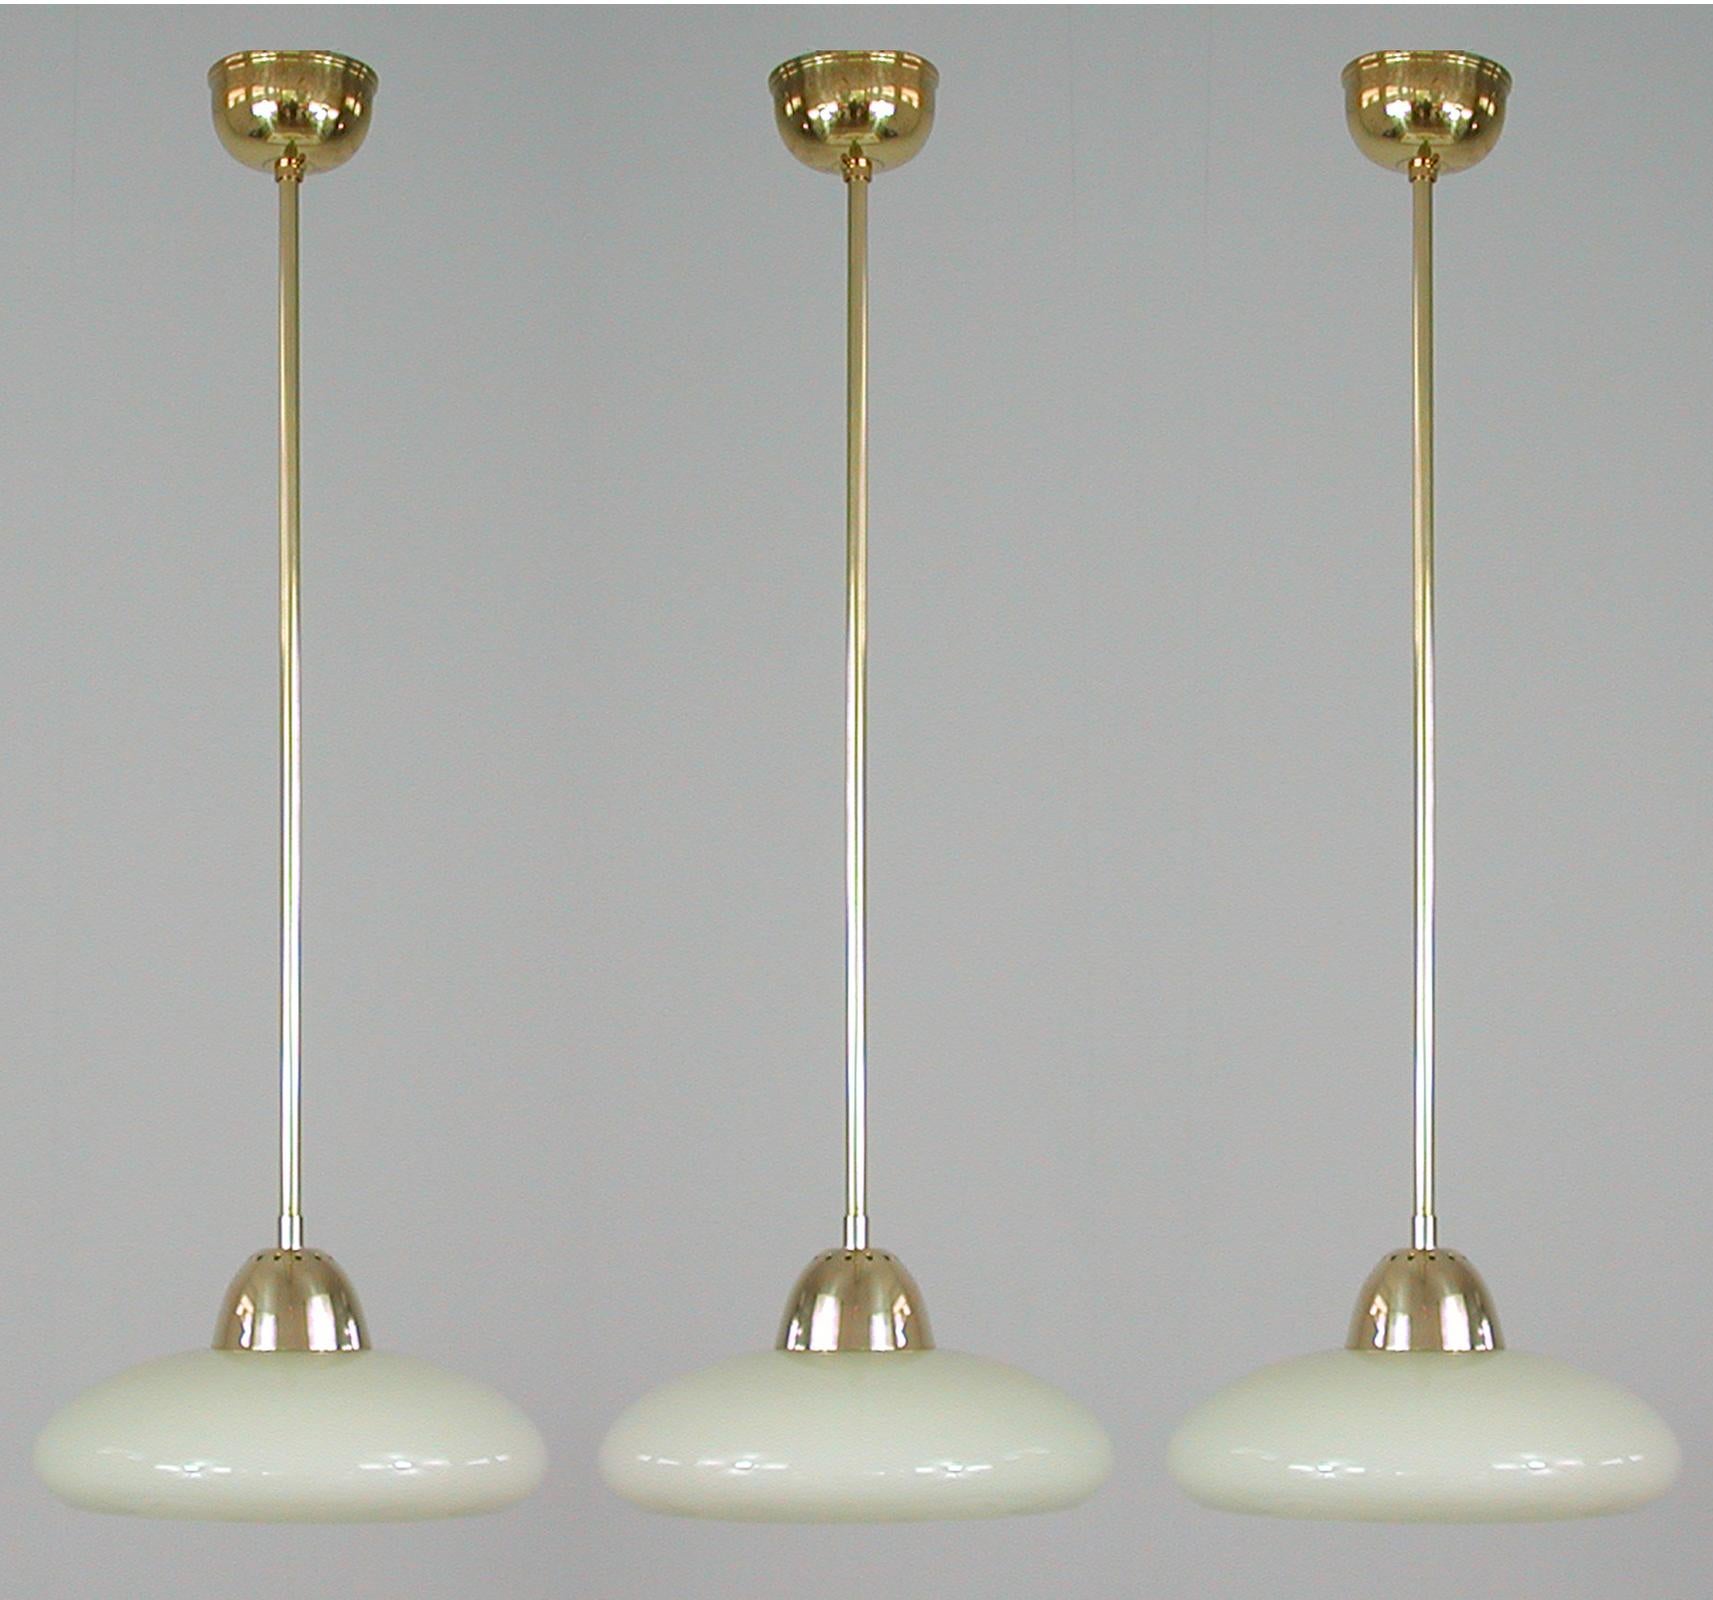 This elegant minimalist Art Deco pendant was designed and manufactured in Germany in the 1930s to 1940s during the Bauhaus period. 

The light features a round cream colored opaline lampshade and brass hardware. It requires one E27 bulb and has